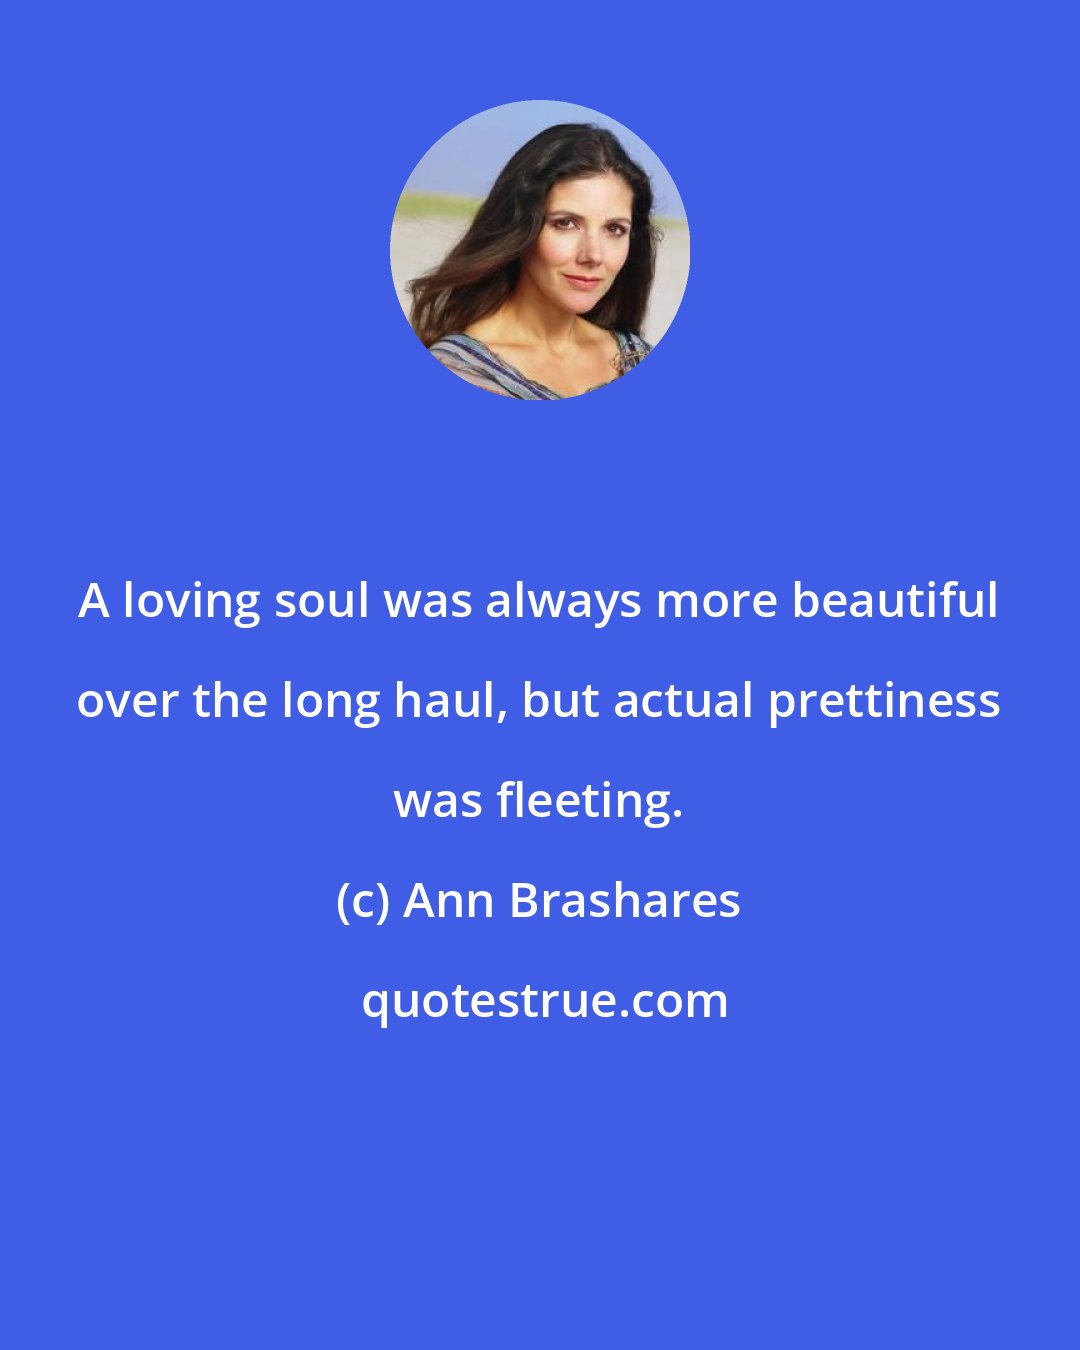 Ann Brashares: A loving soul was always more beautiful over the long haul, but actual prettiness was fleeting.